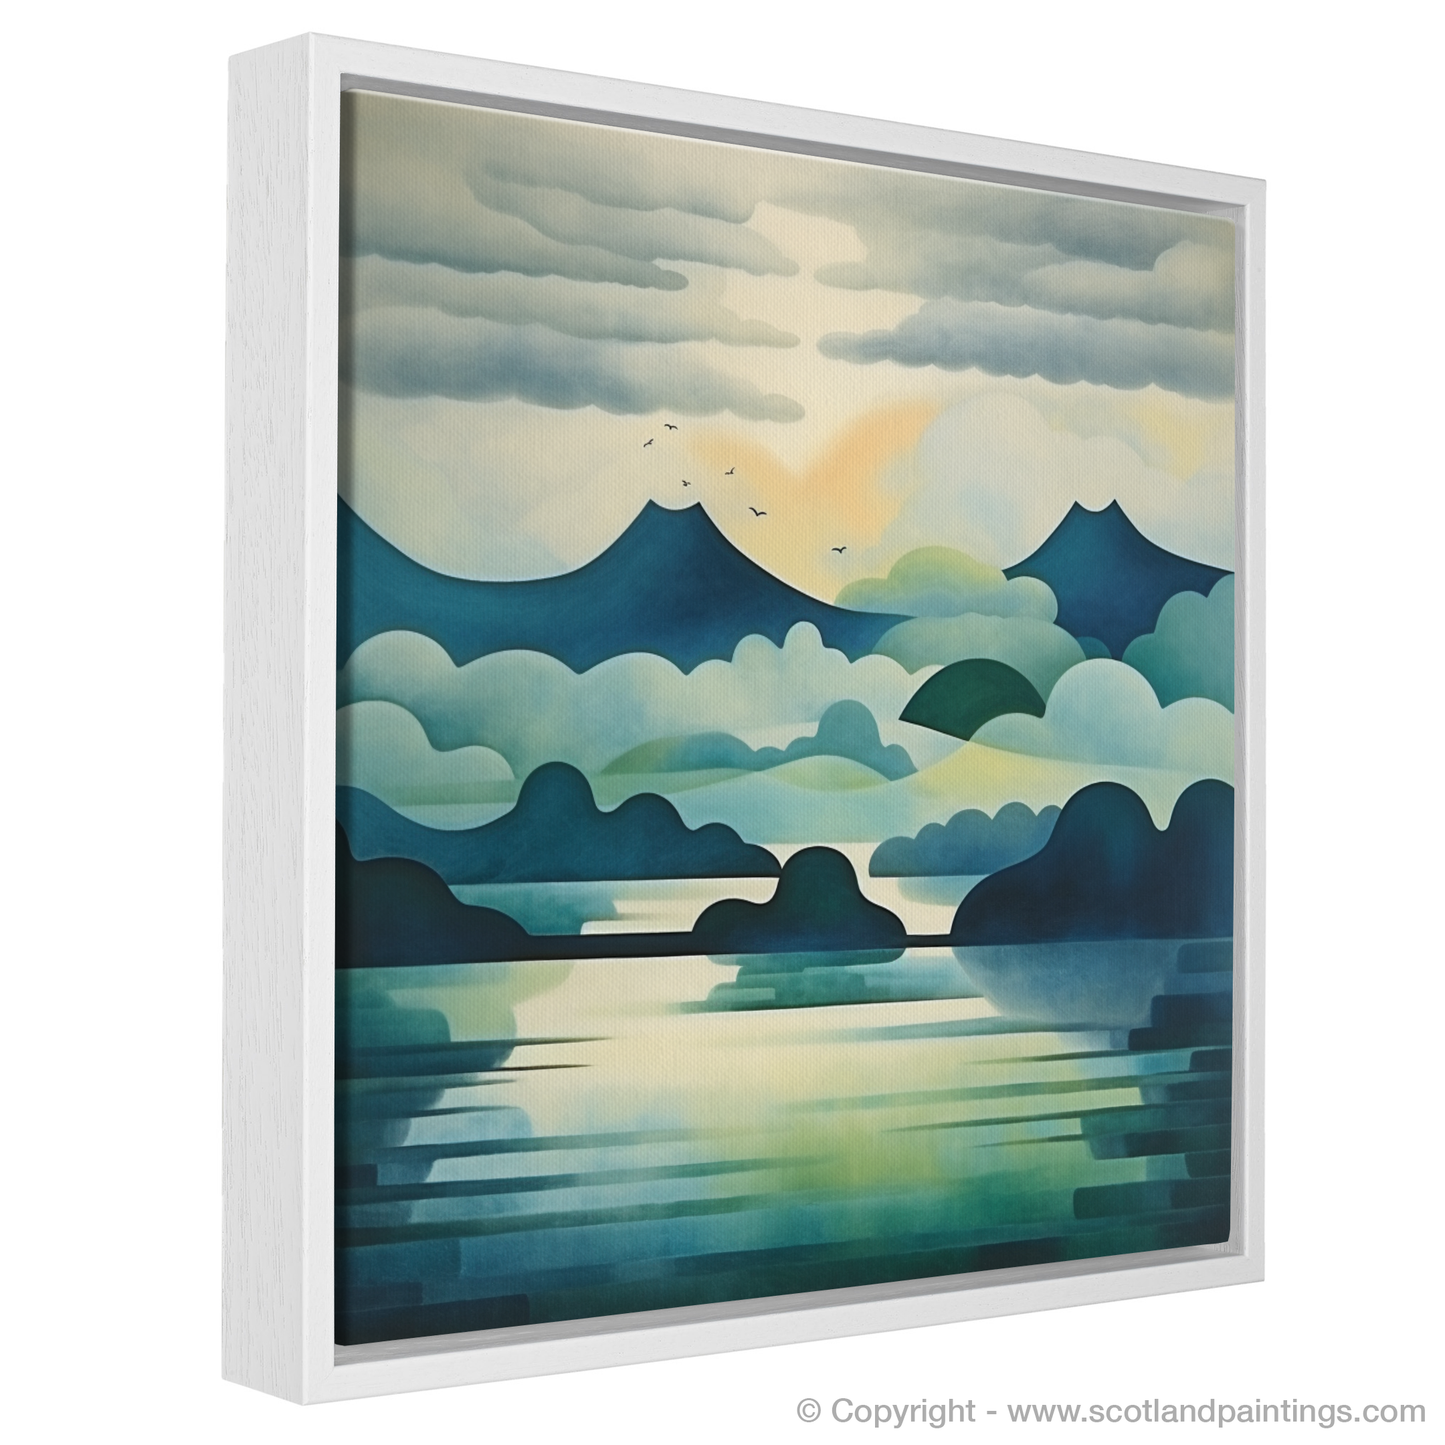 Painting and Art Print of Misty morning on Loch Lomond entitled "Misty Morning Majesty: An Abstract Ode to Loch Lomond".